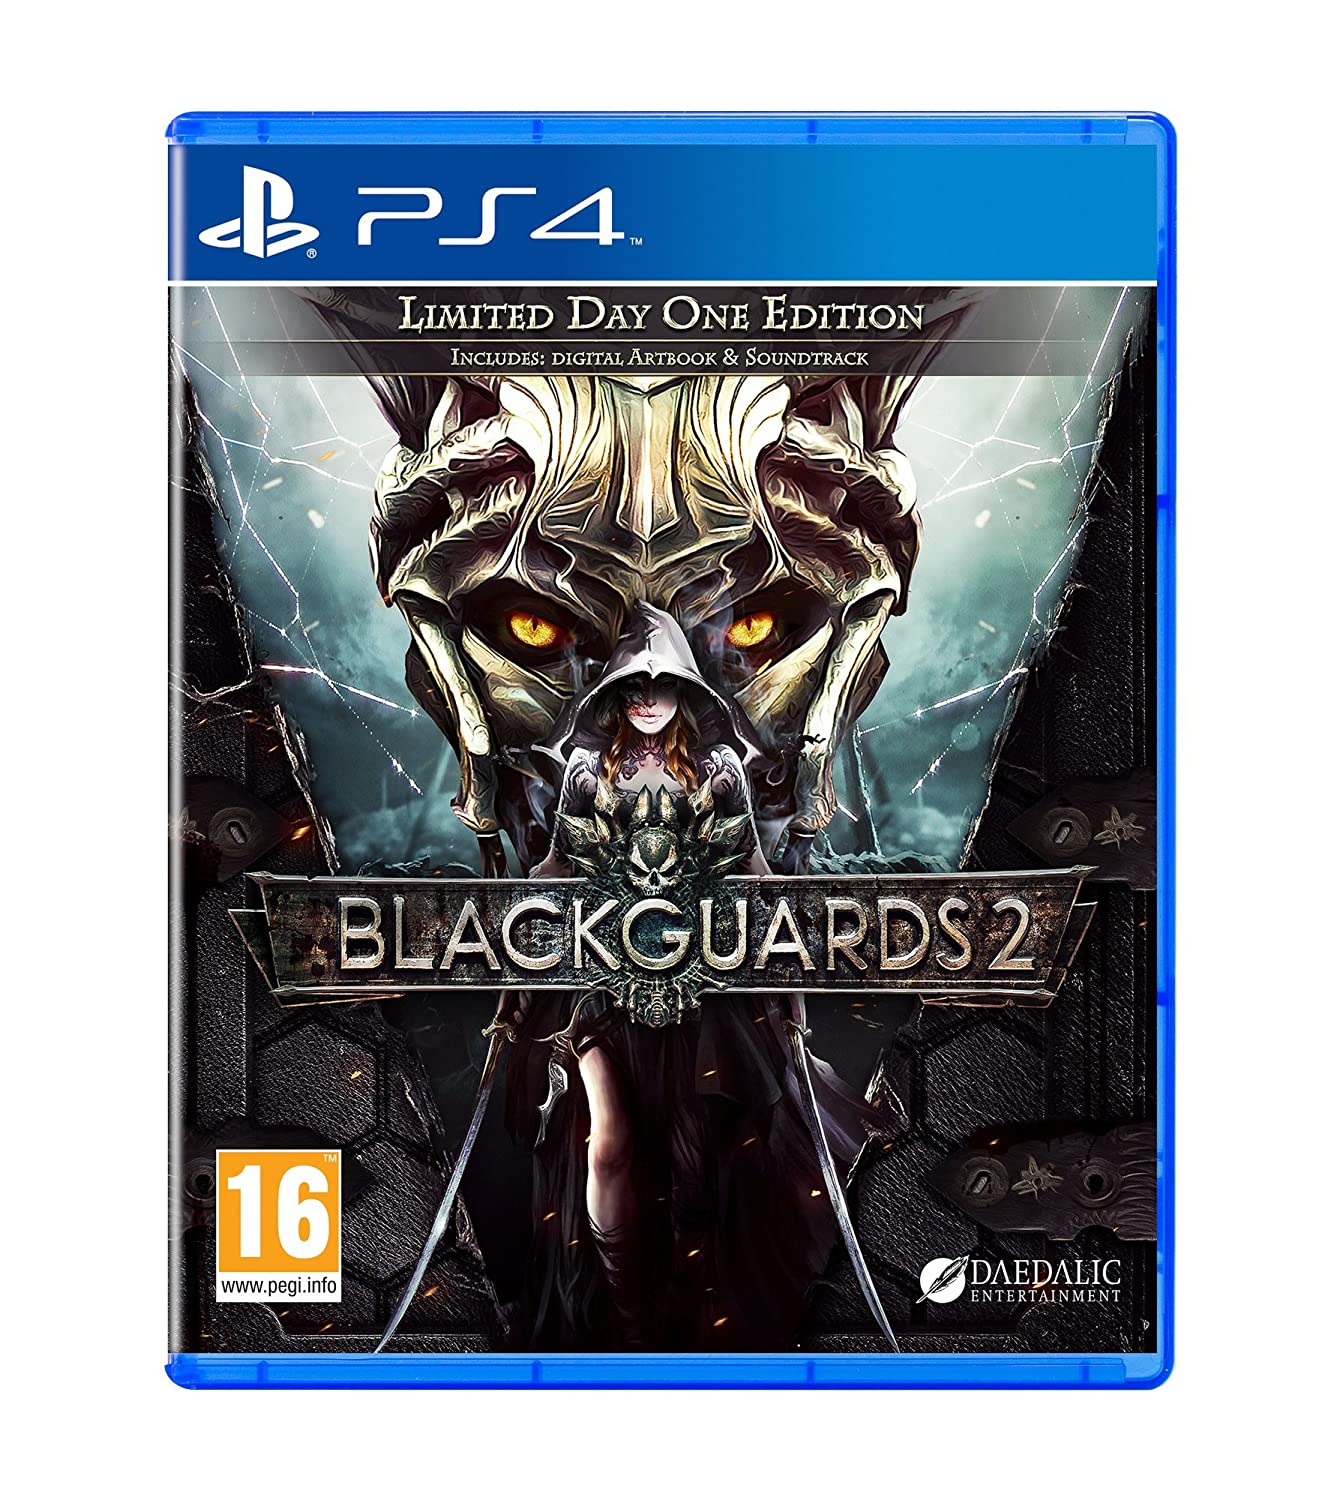 Blackguards 2 - Limited Day One Edition (EUR)*